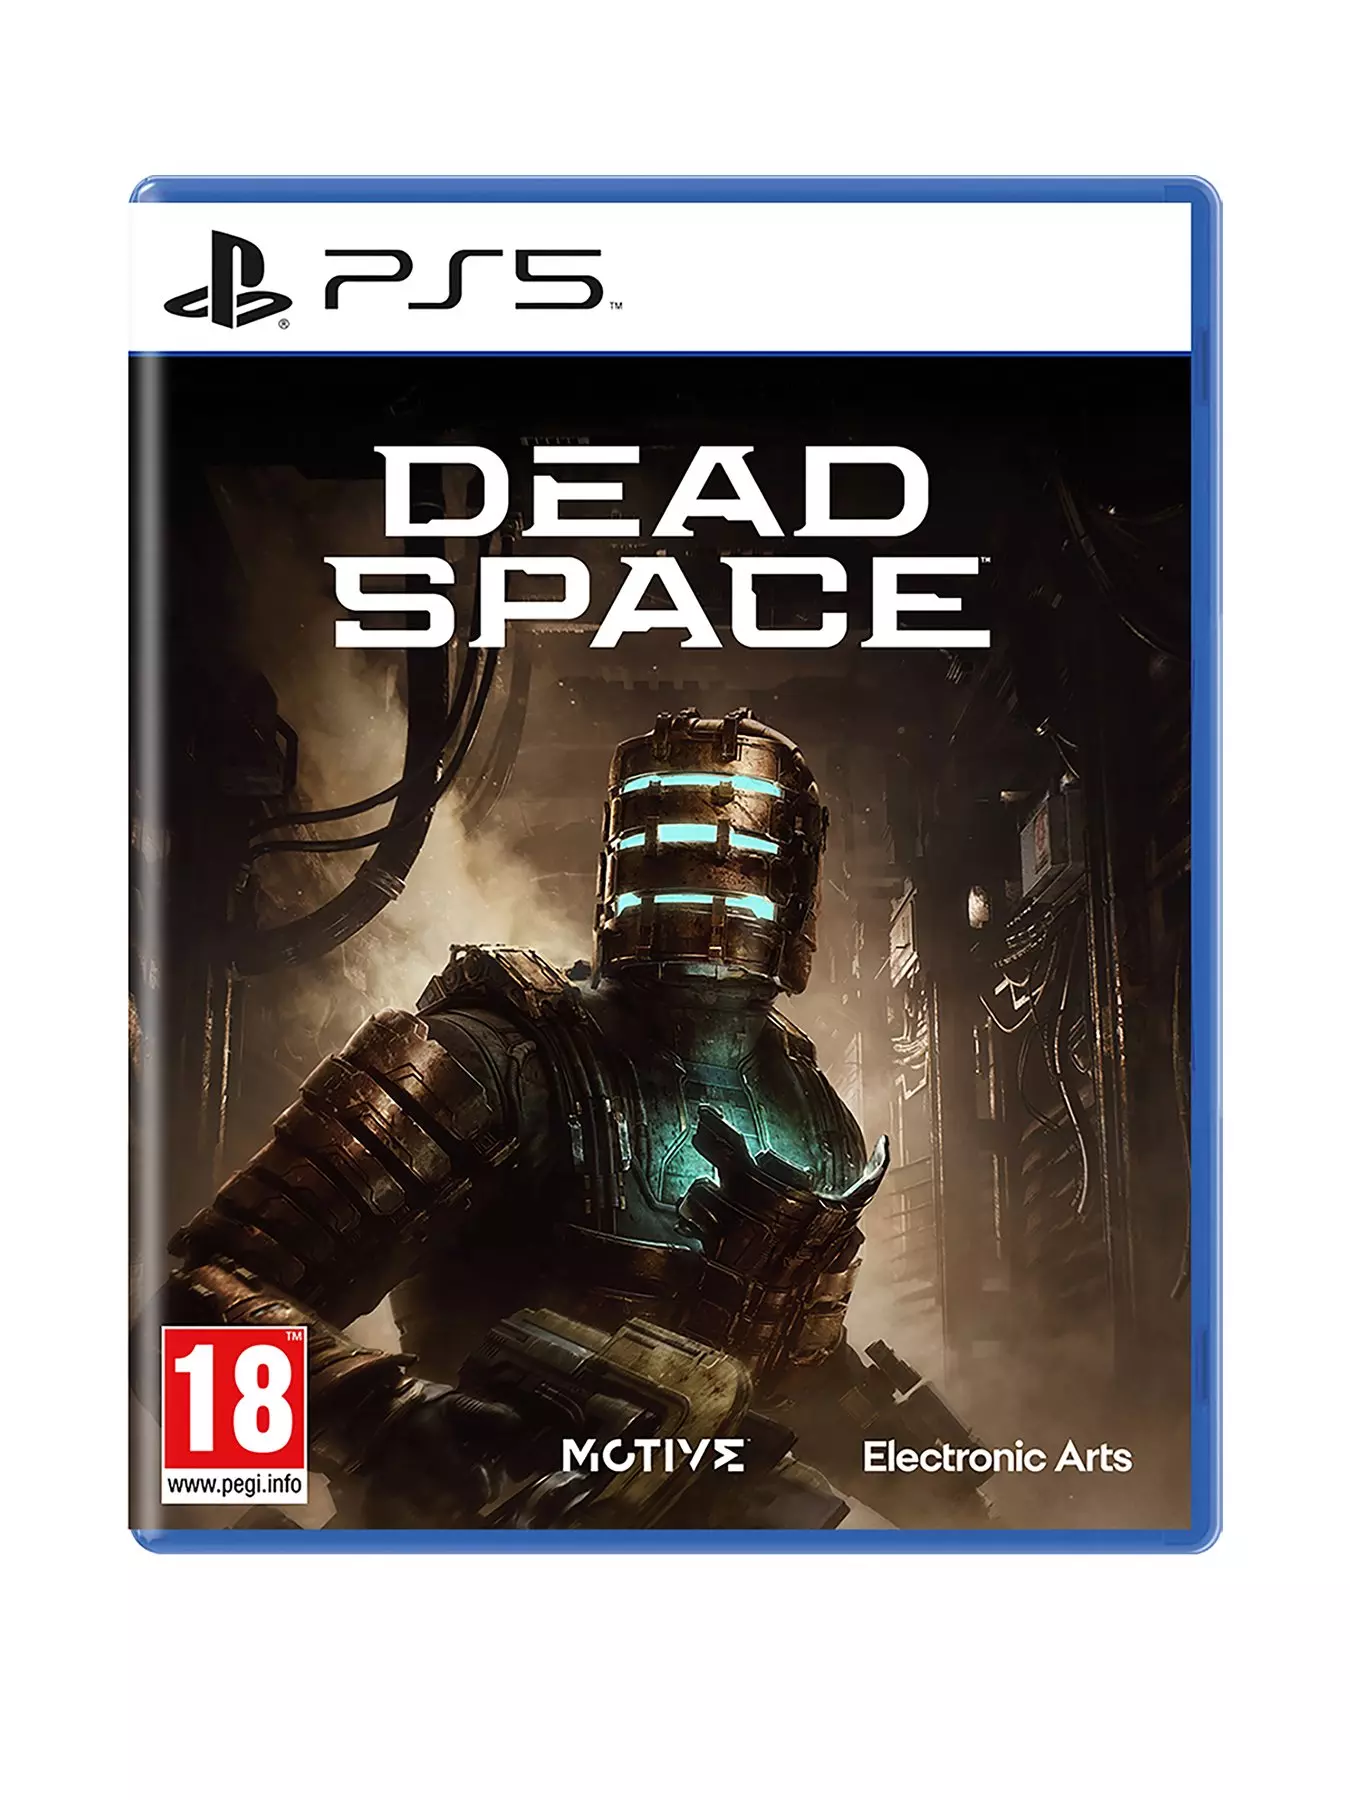 Dead Space Remake Suit LVL 6 Isaac Clarke Full Wearable Armor 3D